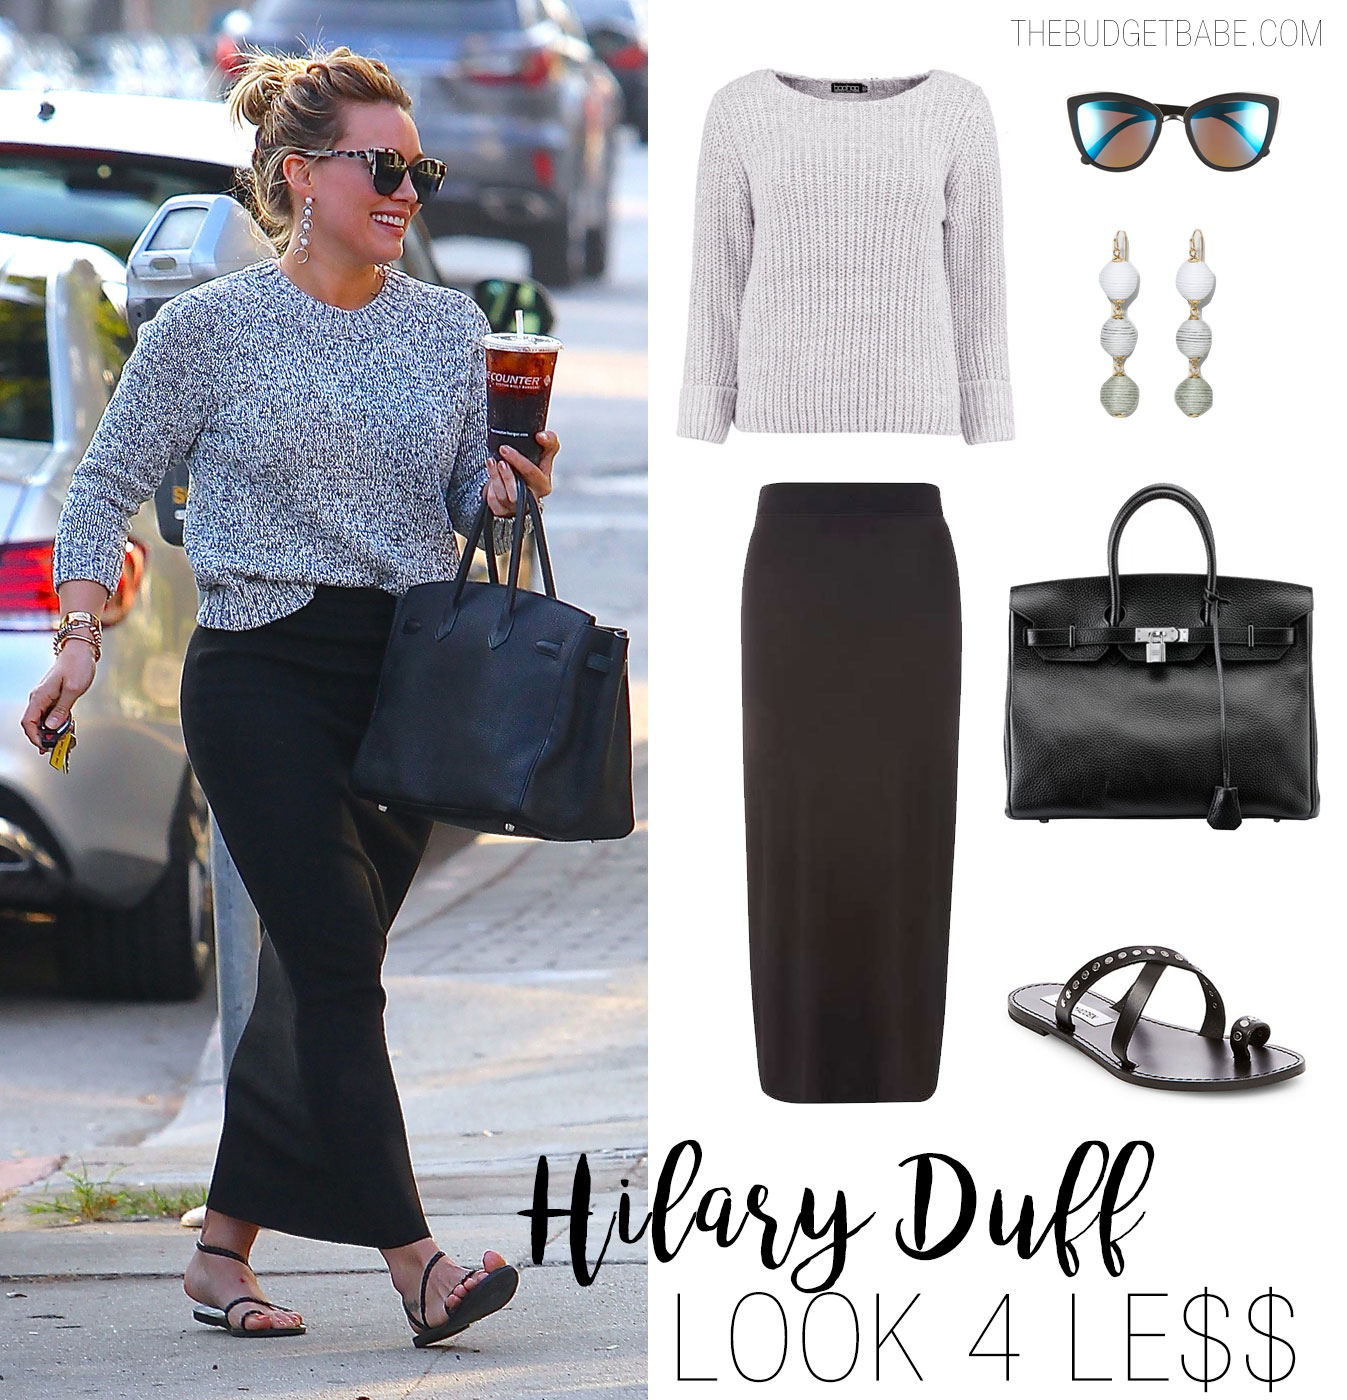 Hilary Duff has the best mom-on-the-go style in her black maxi skirt and Ancient Greek sandals.